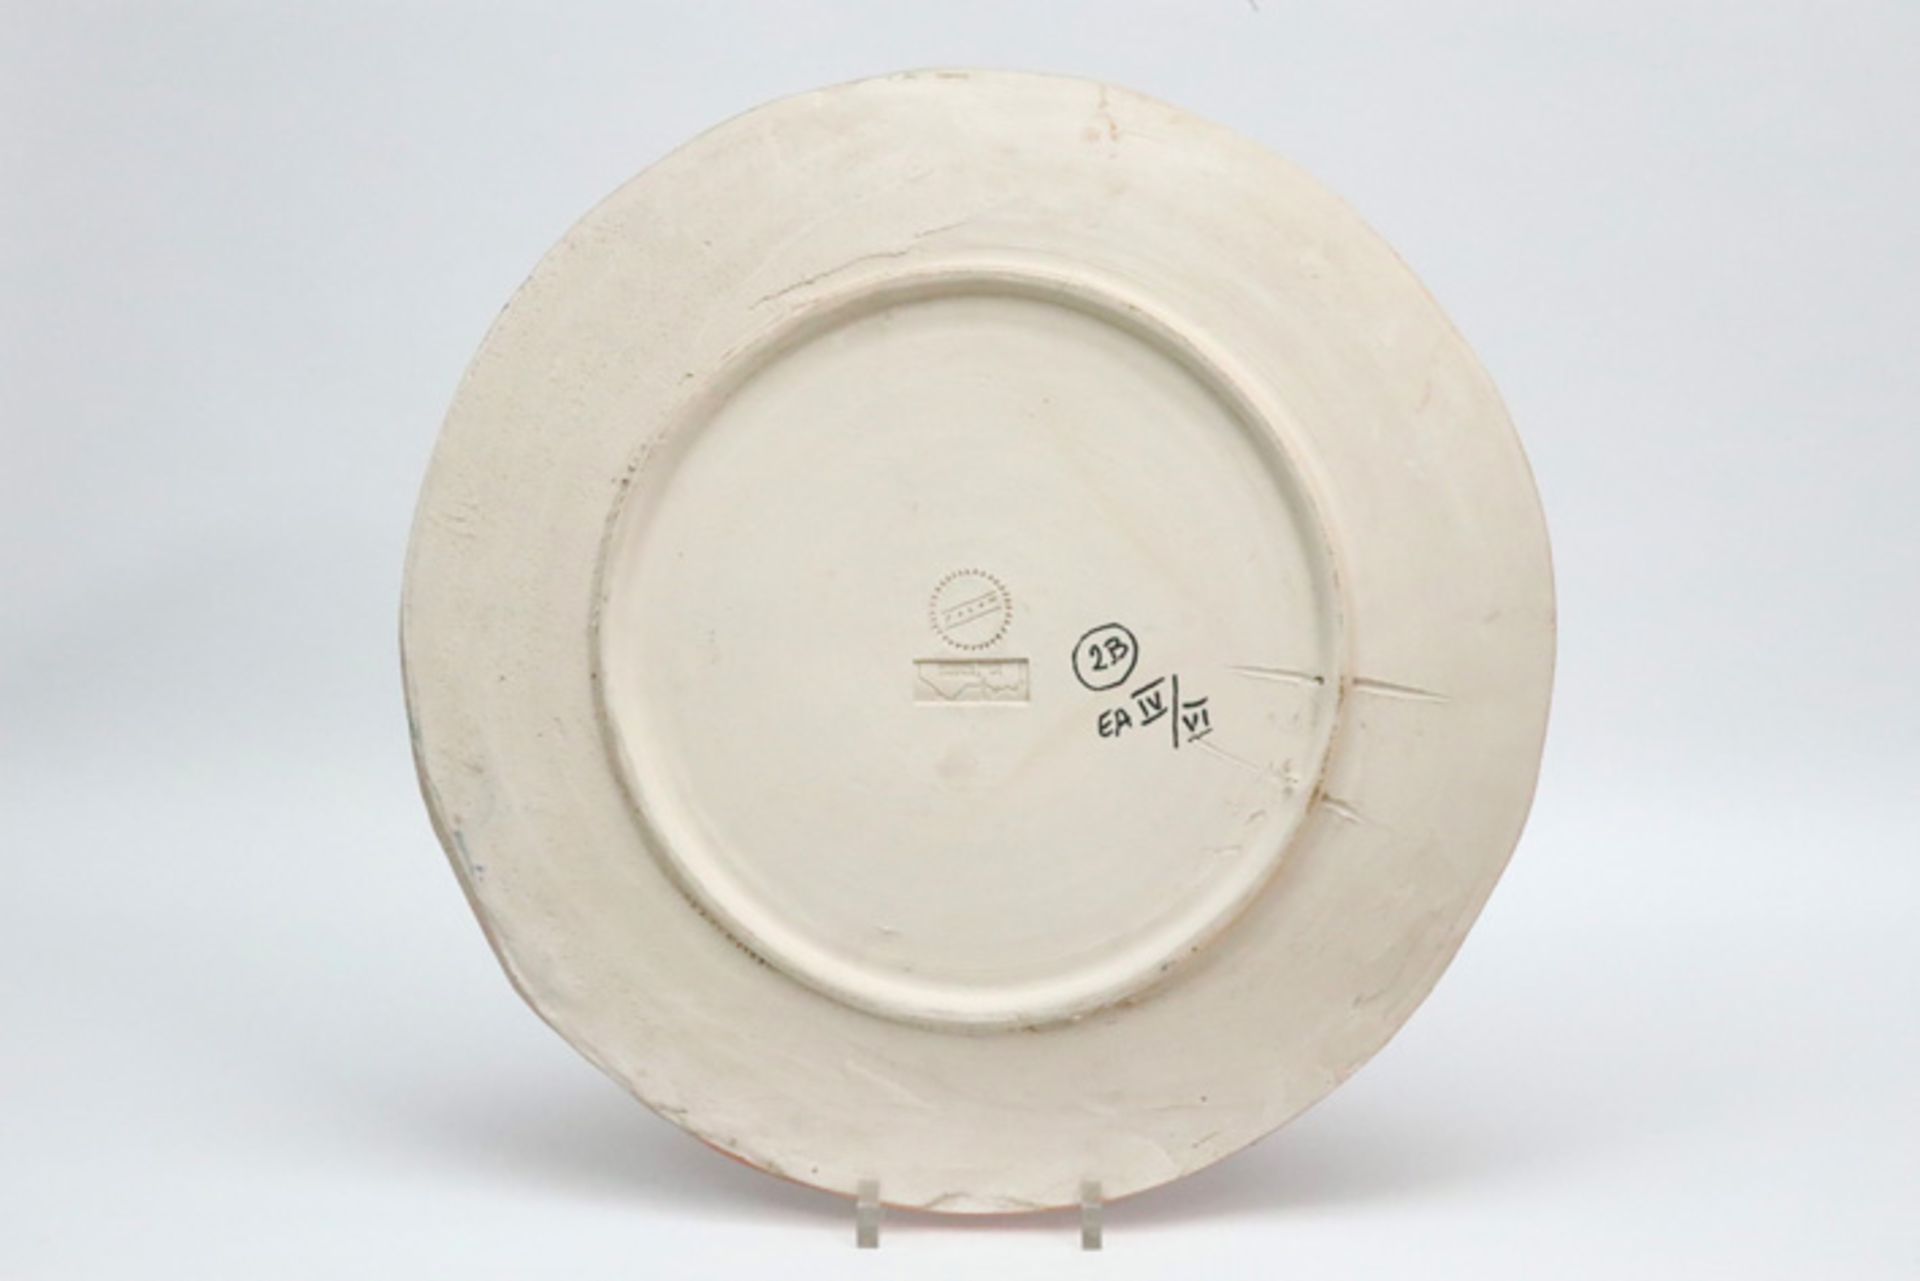 20th Cent. Jean-Michel Folon charger in ceramic with polychrome typical decor signed, numbered and - Image 3 of 4